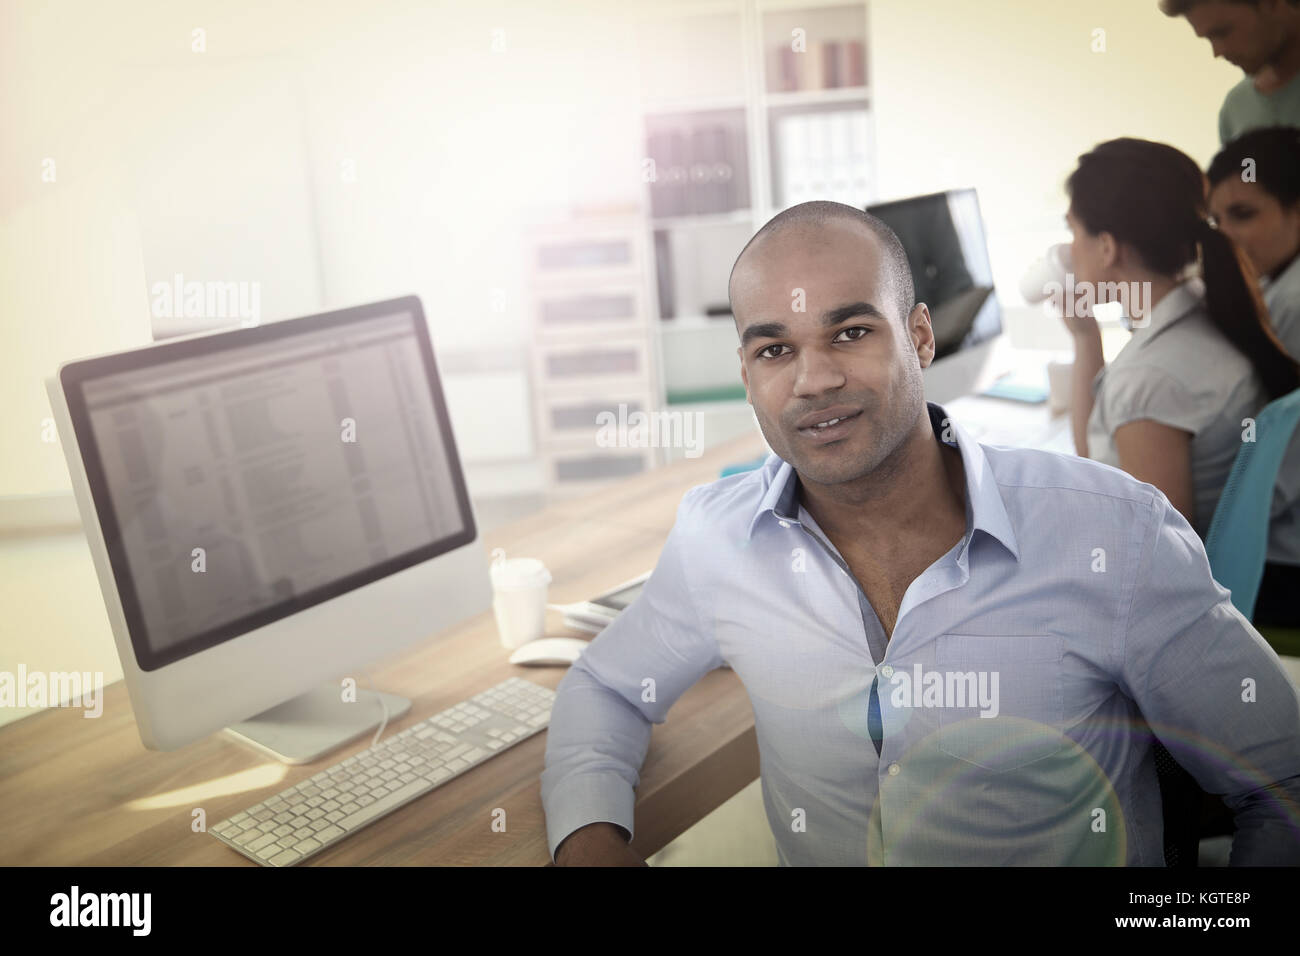 Portrait of young businessman in office Banque D'Images